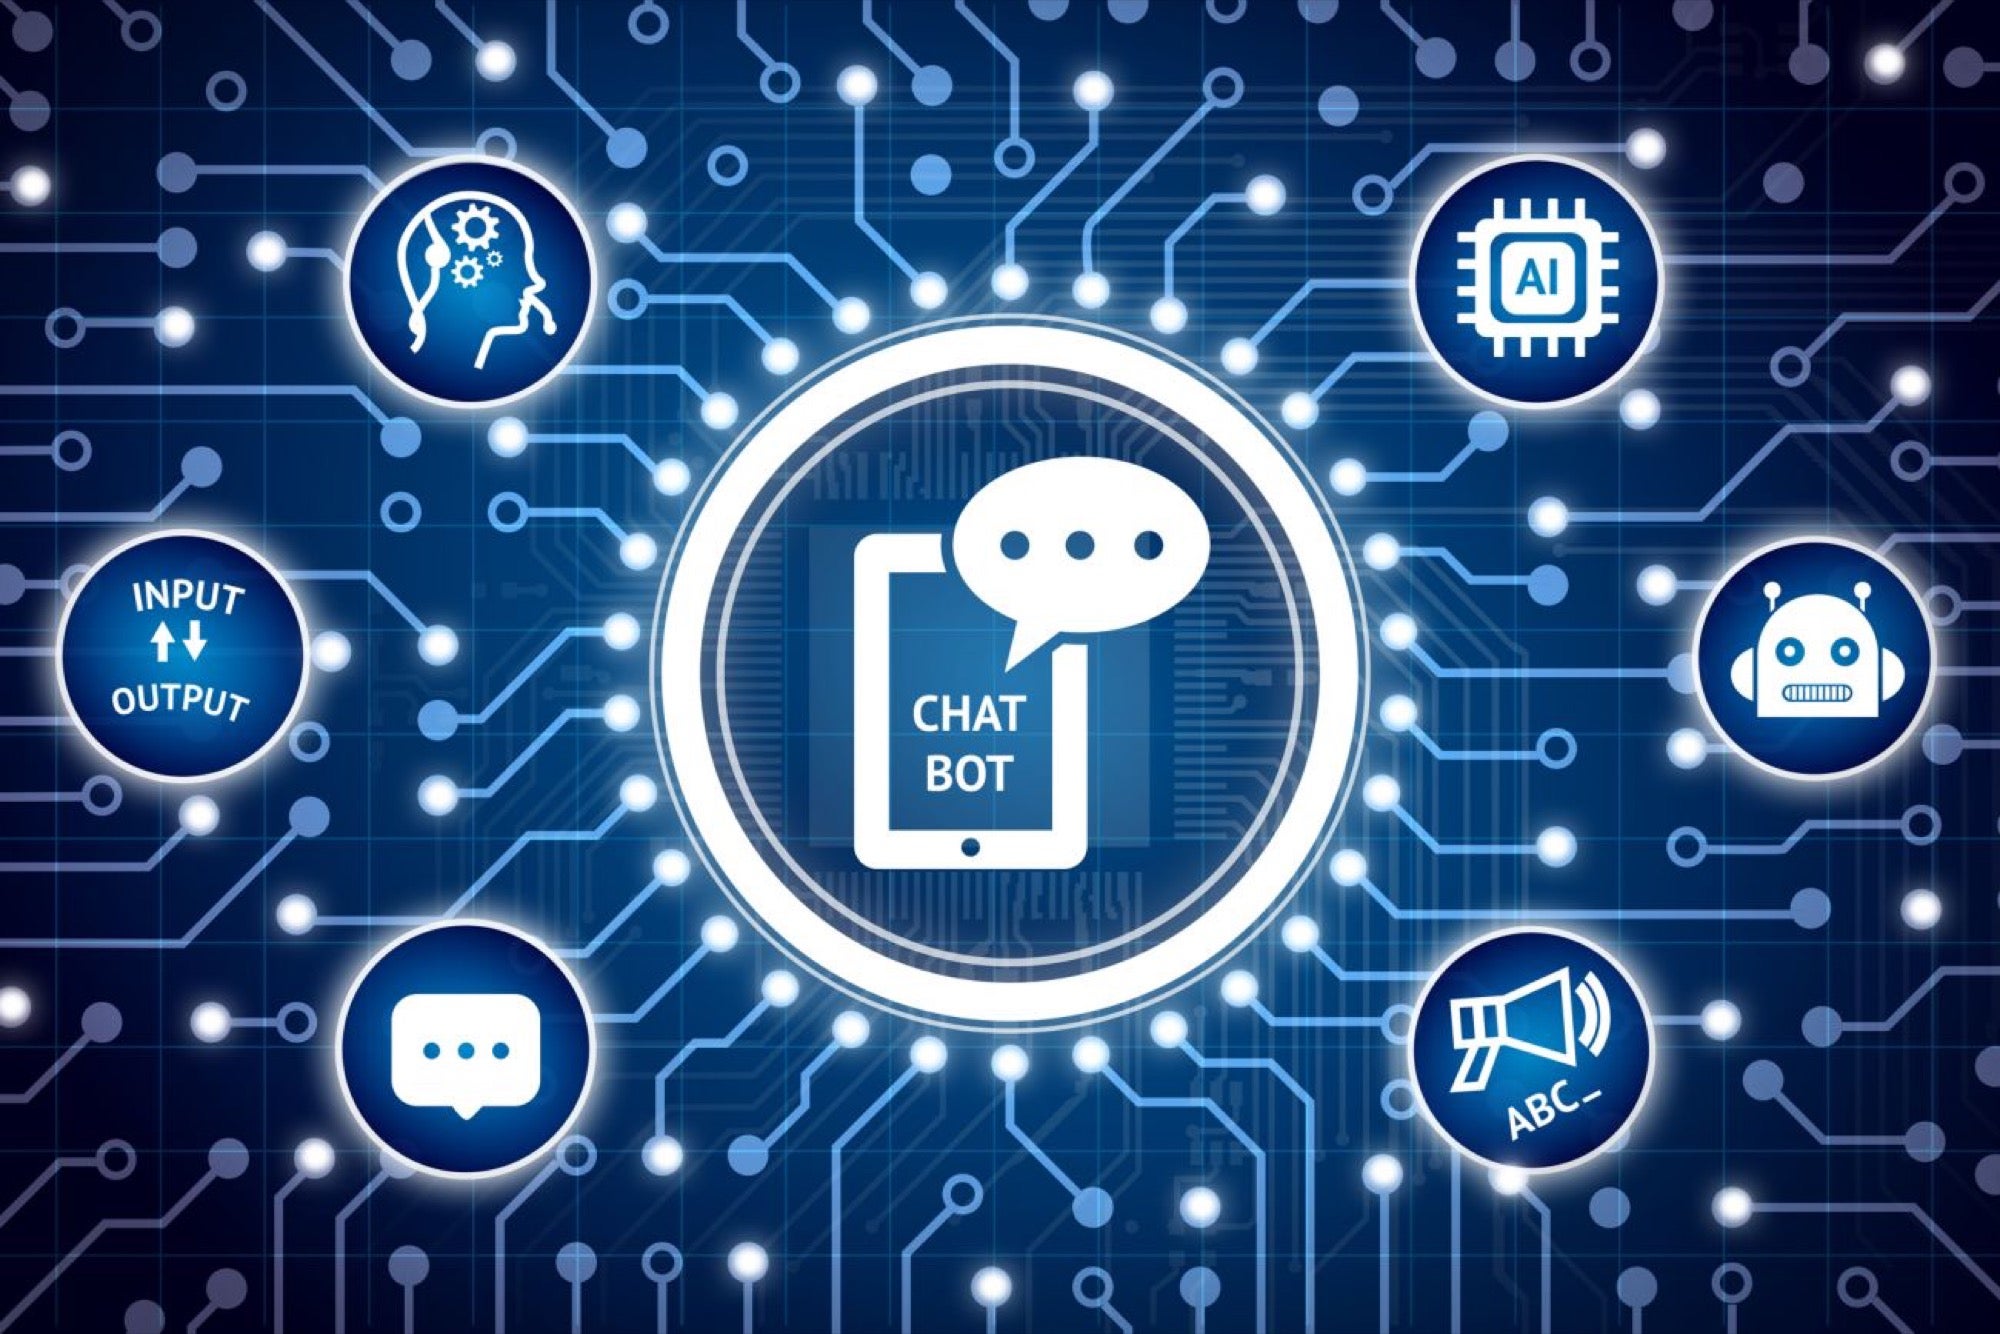 Chatbot icon at the center of a digital network with various AI and machine learning symbols, suggesting the integration of chatbots with advanced technology systems.